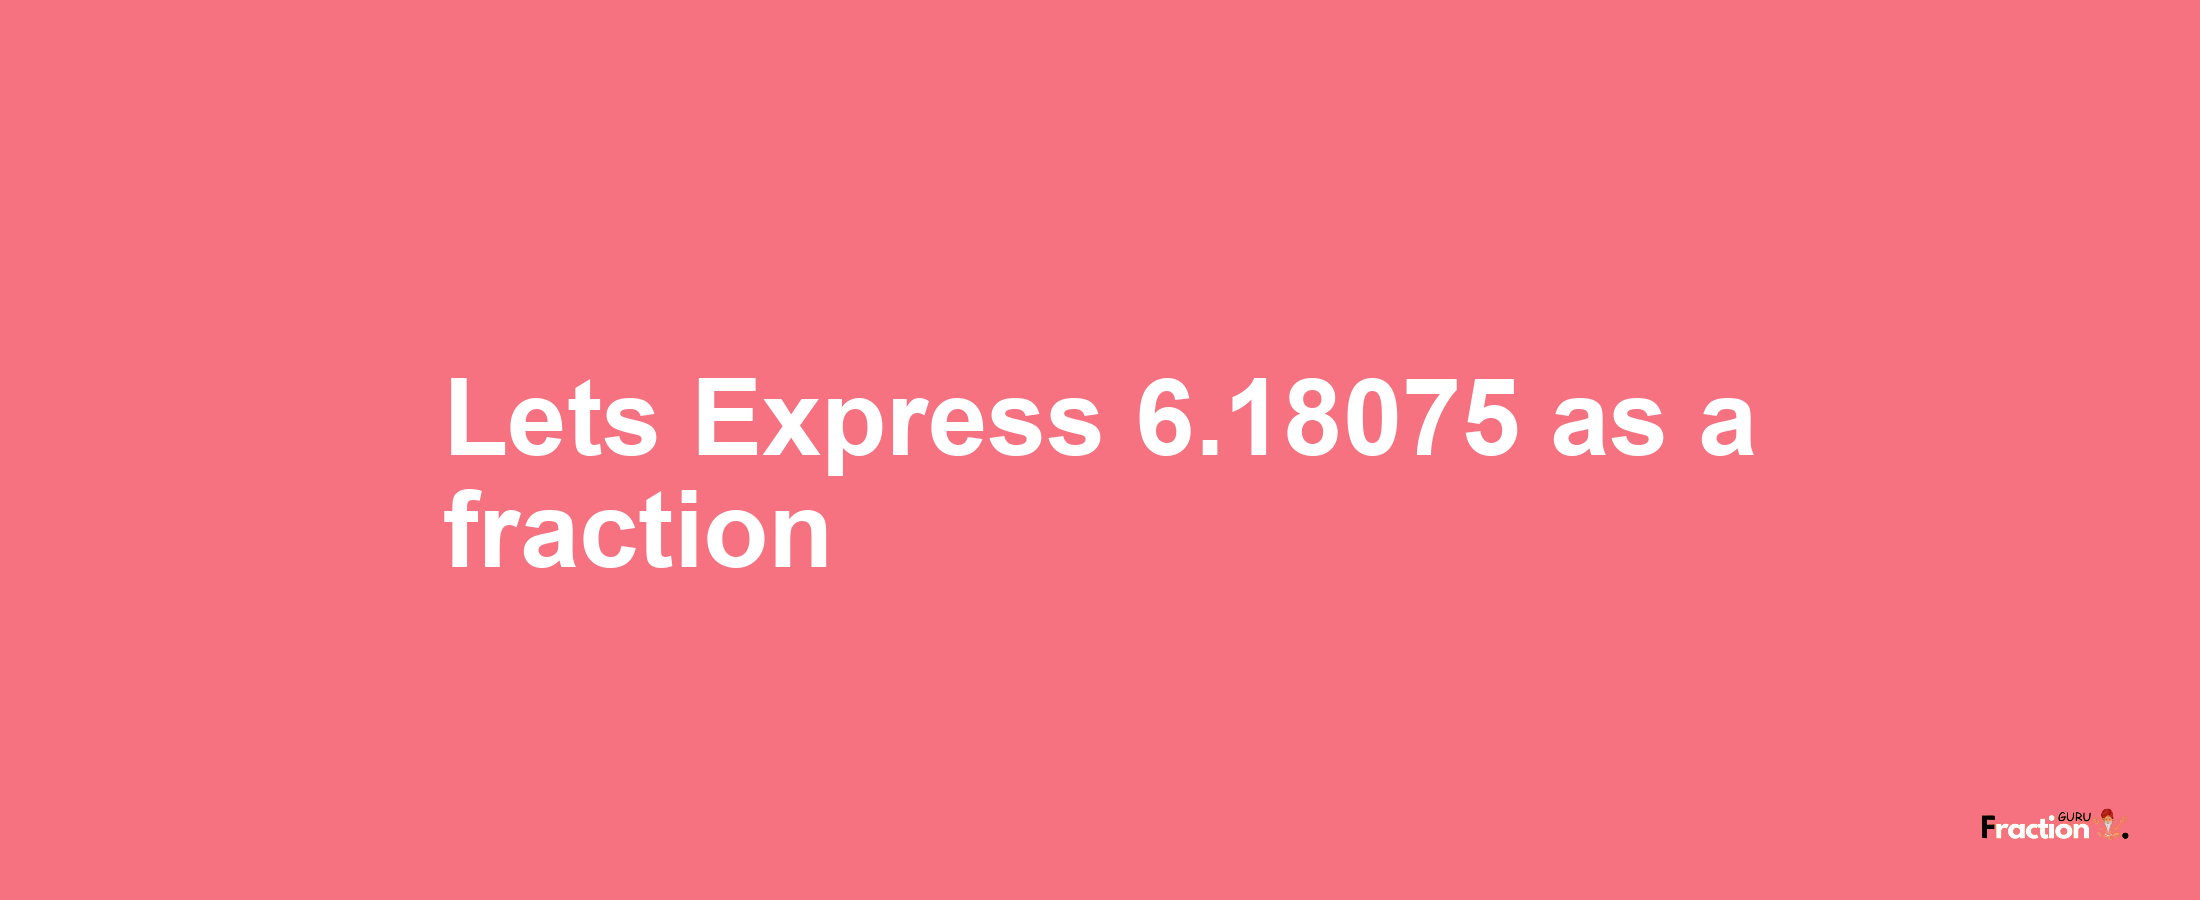 Lets Express 6.18075 as afraction